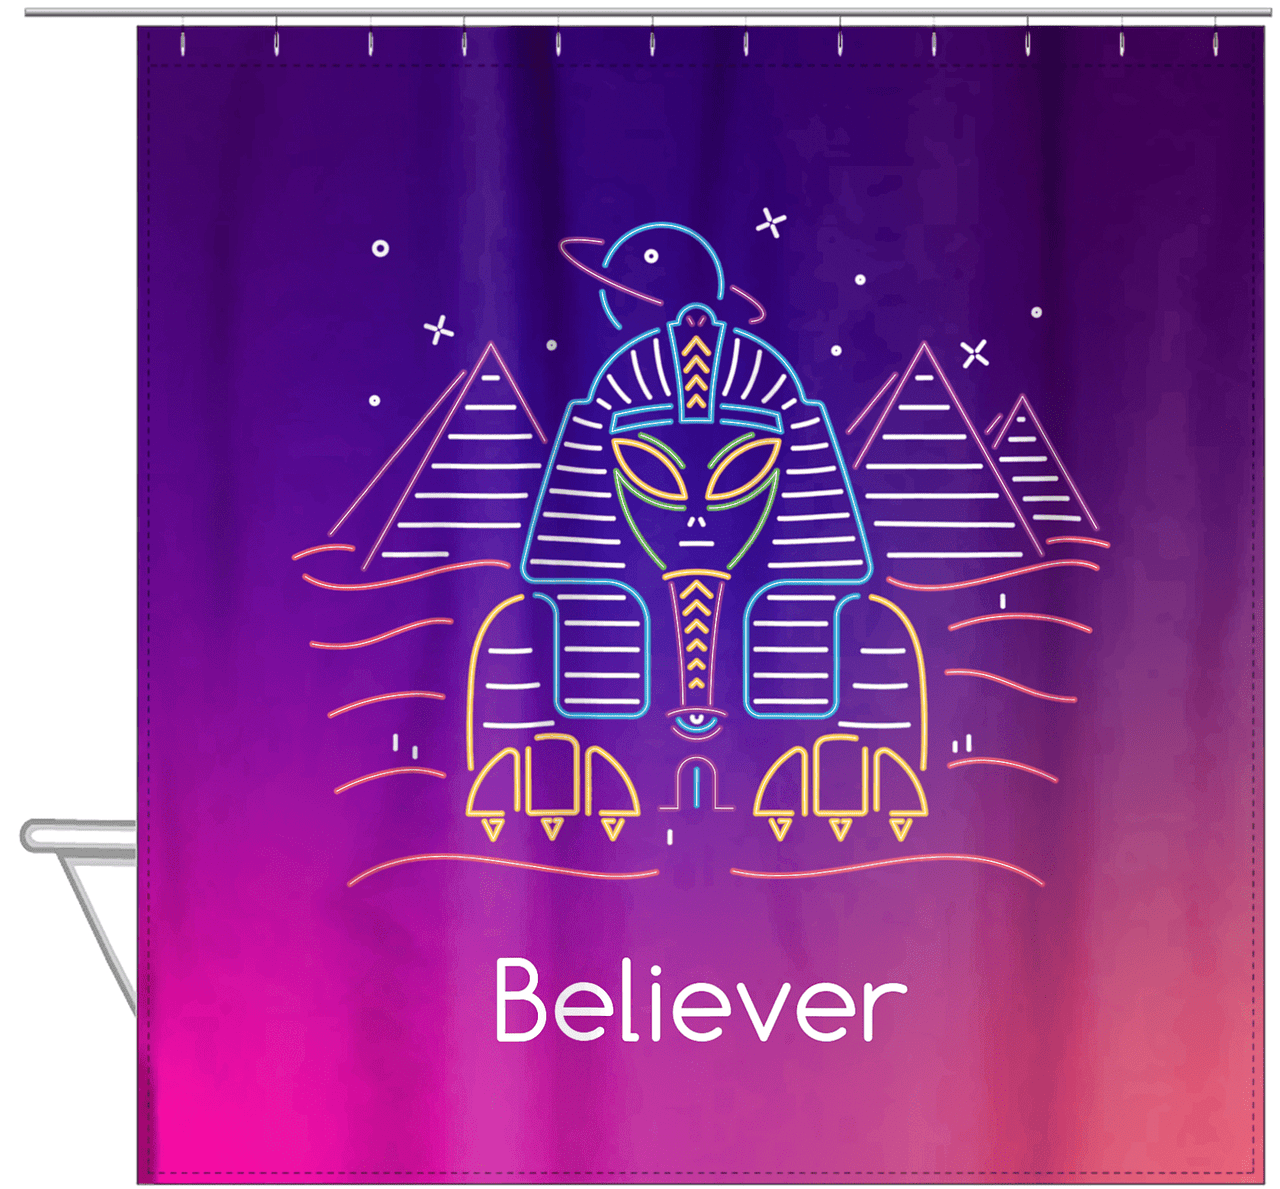 Aliens / UFO Shower Curtain - Sphinx - Hanging View